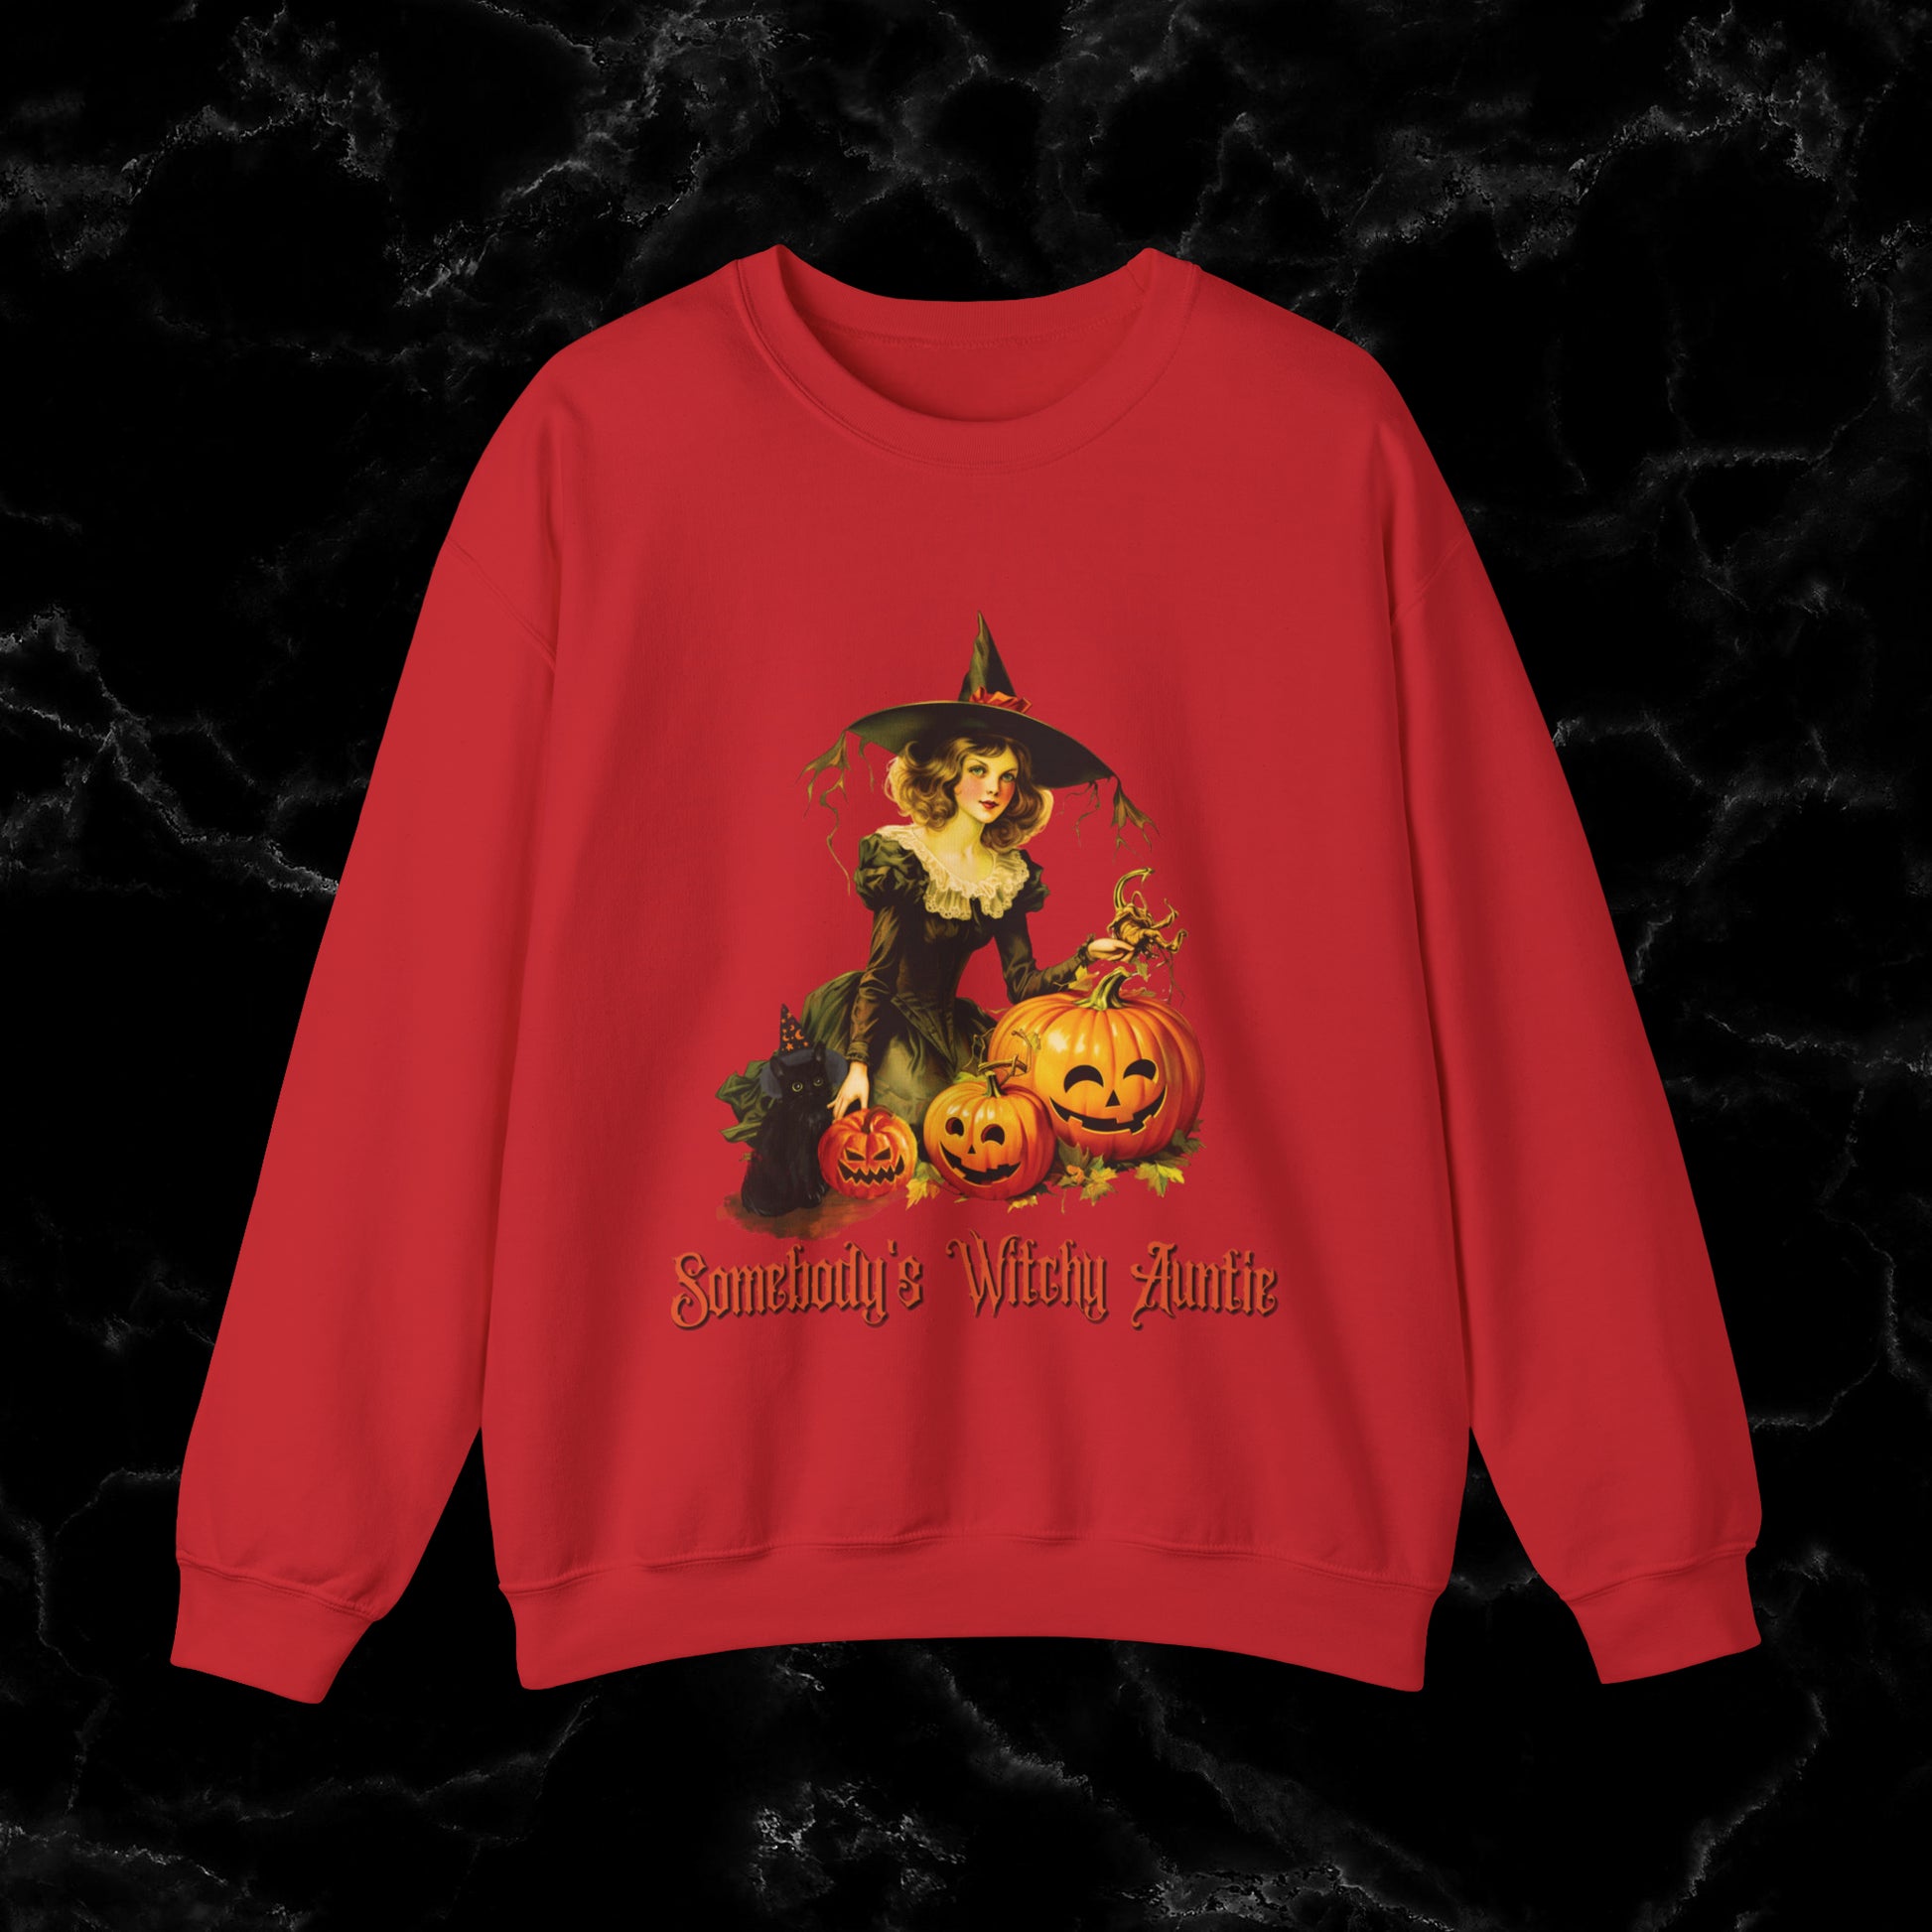 Witchy Auntie Sweatshirt - Cool Aunt Shirt for Halloweenl Vibes Sweatshirt S Red 